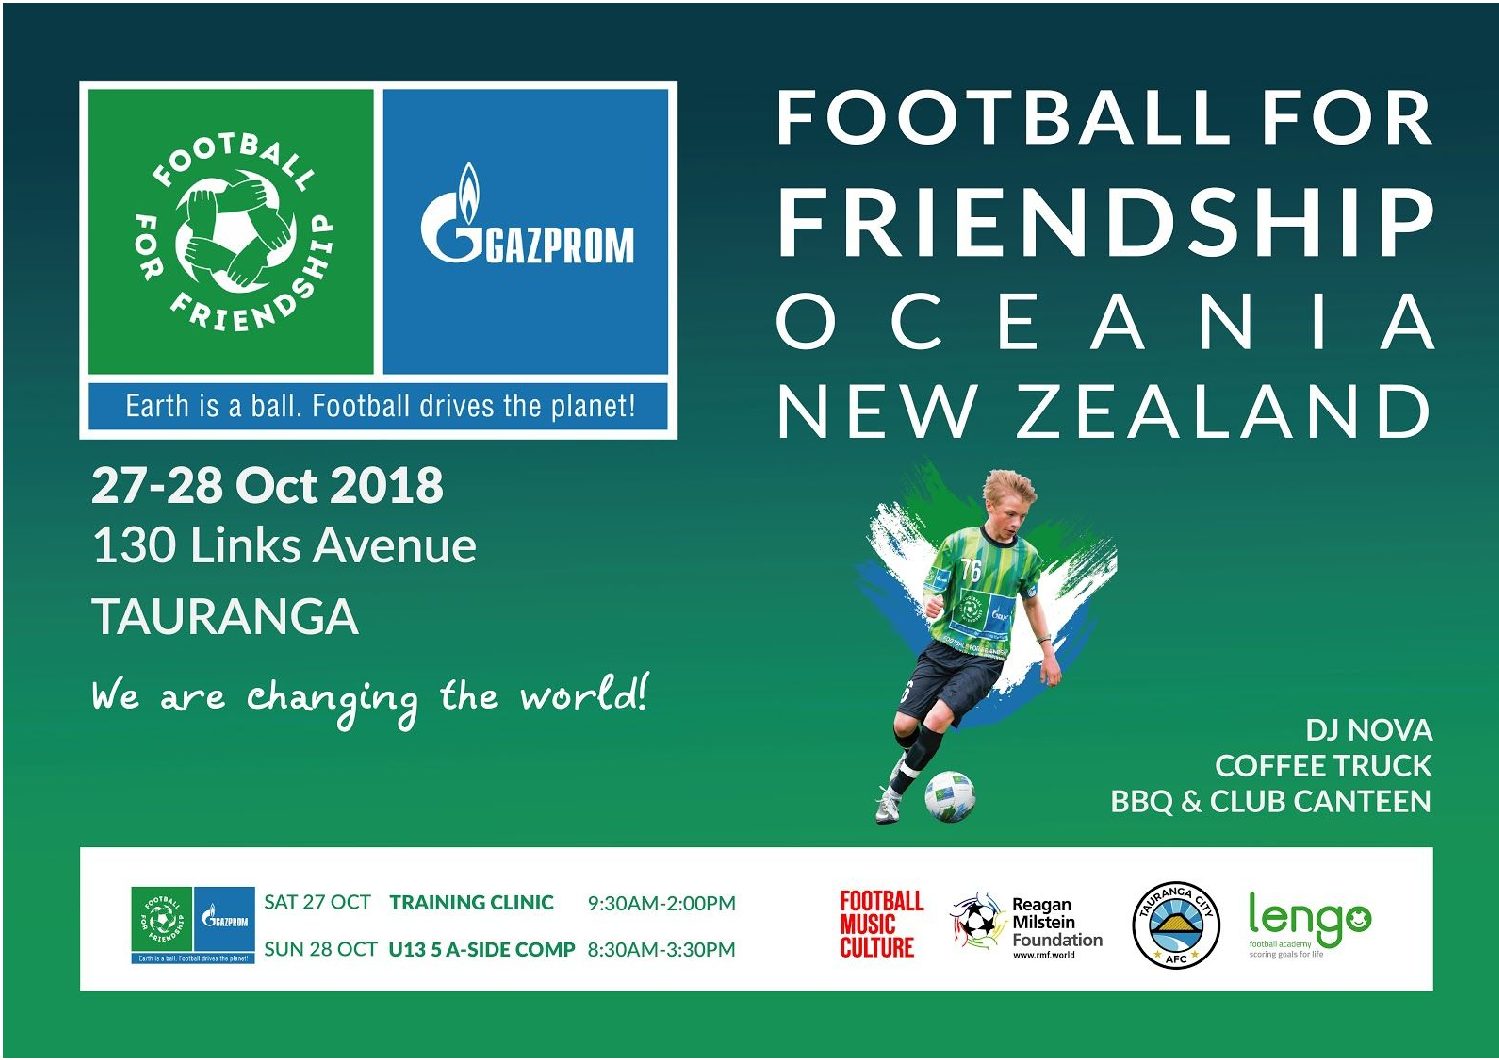 IN THE NEWS: Championing football in the name of friendship